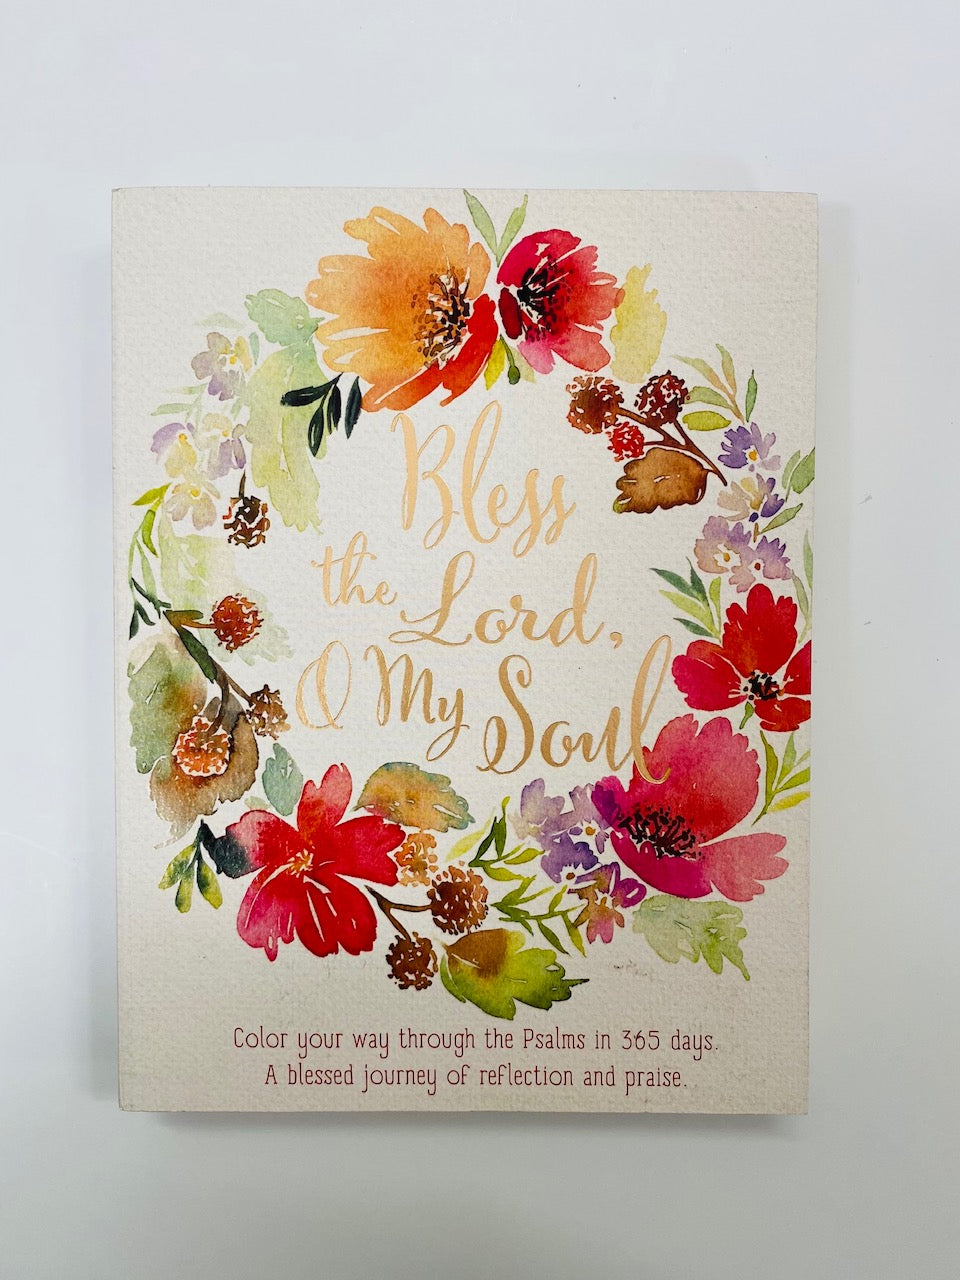 Colouring Book: Bless the Lord, O My Soul